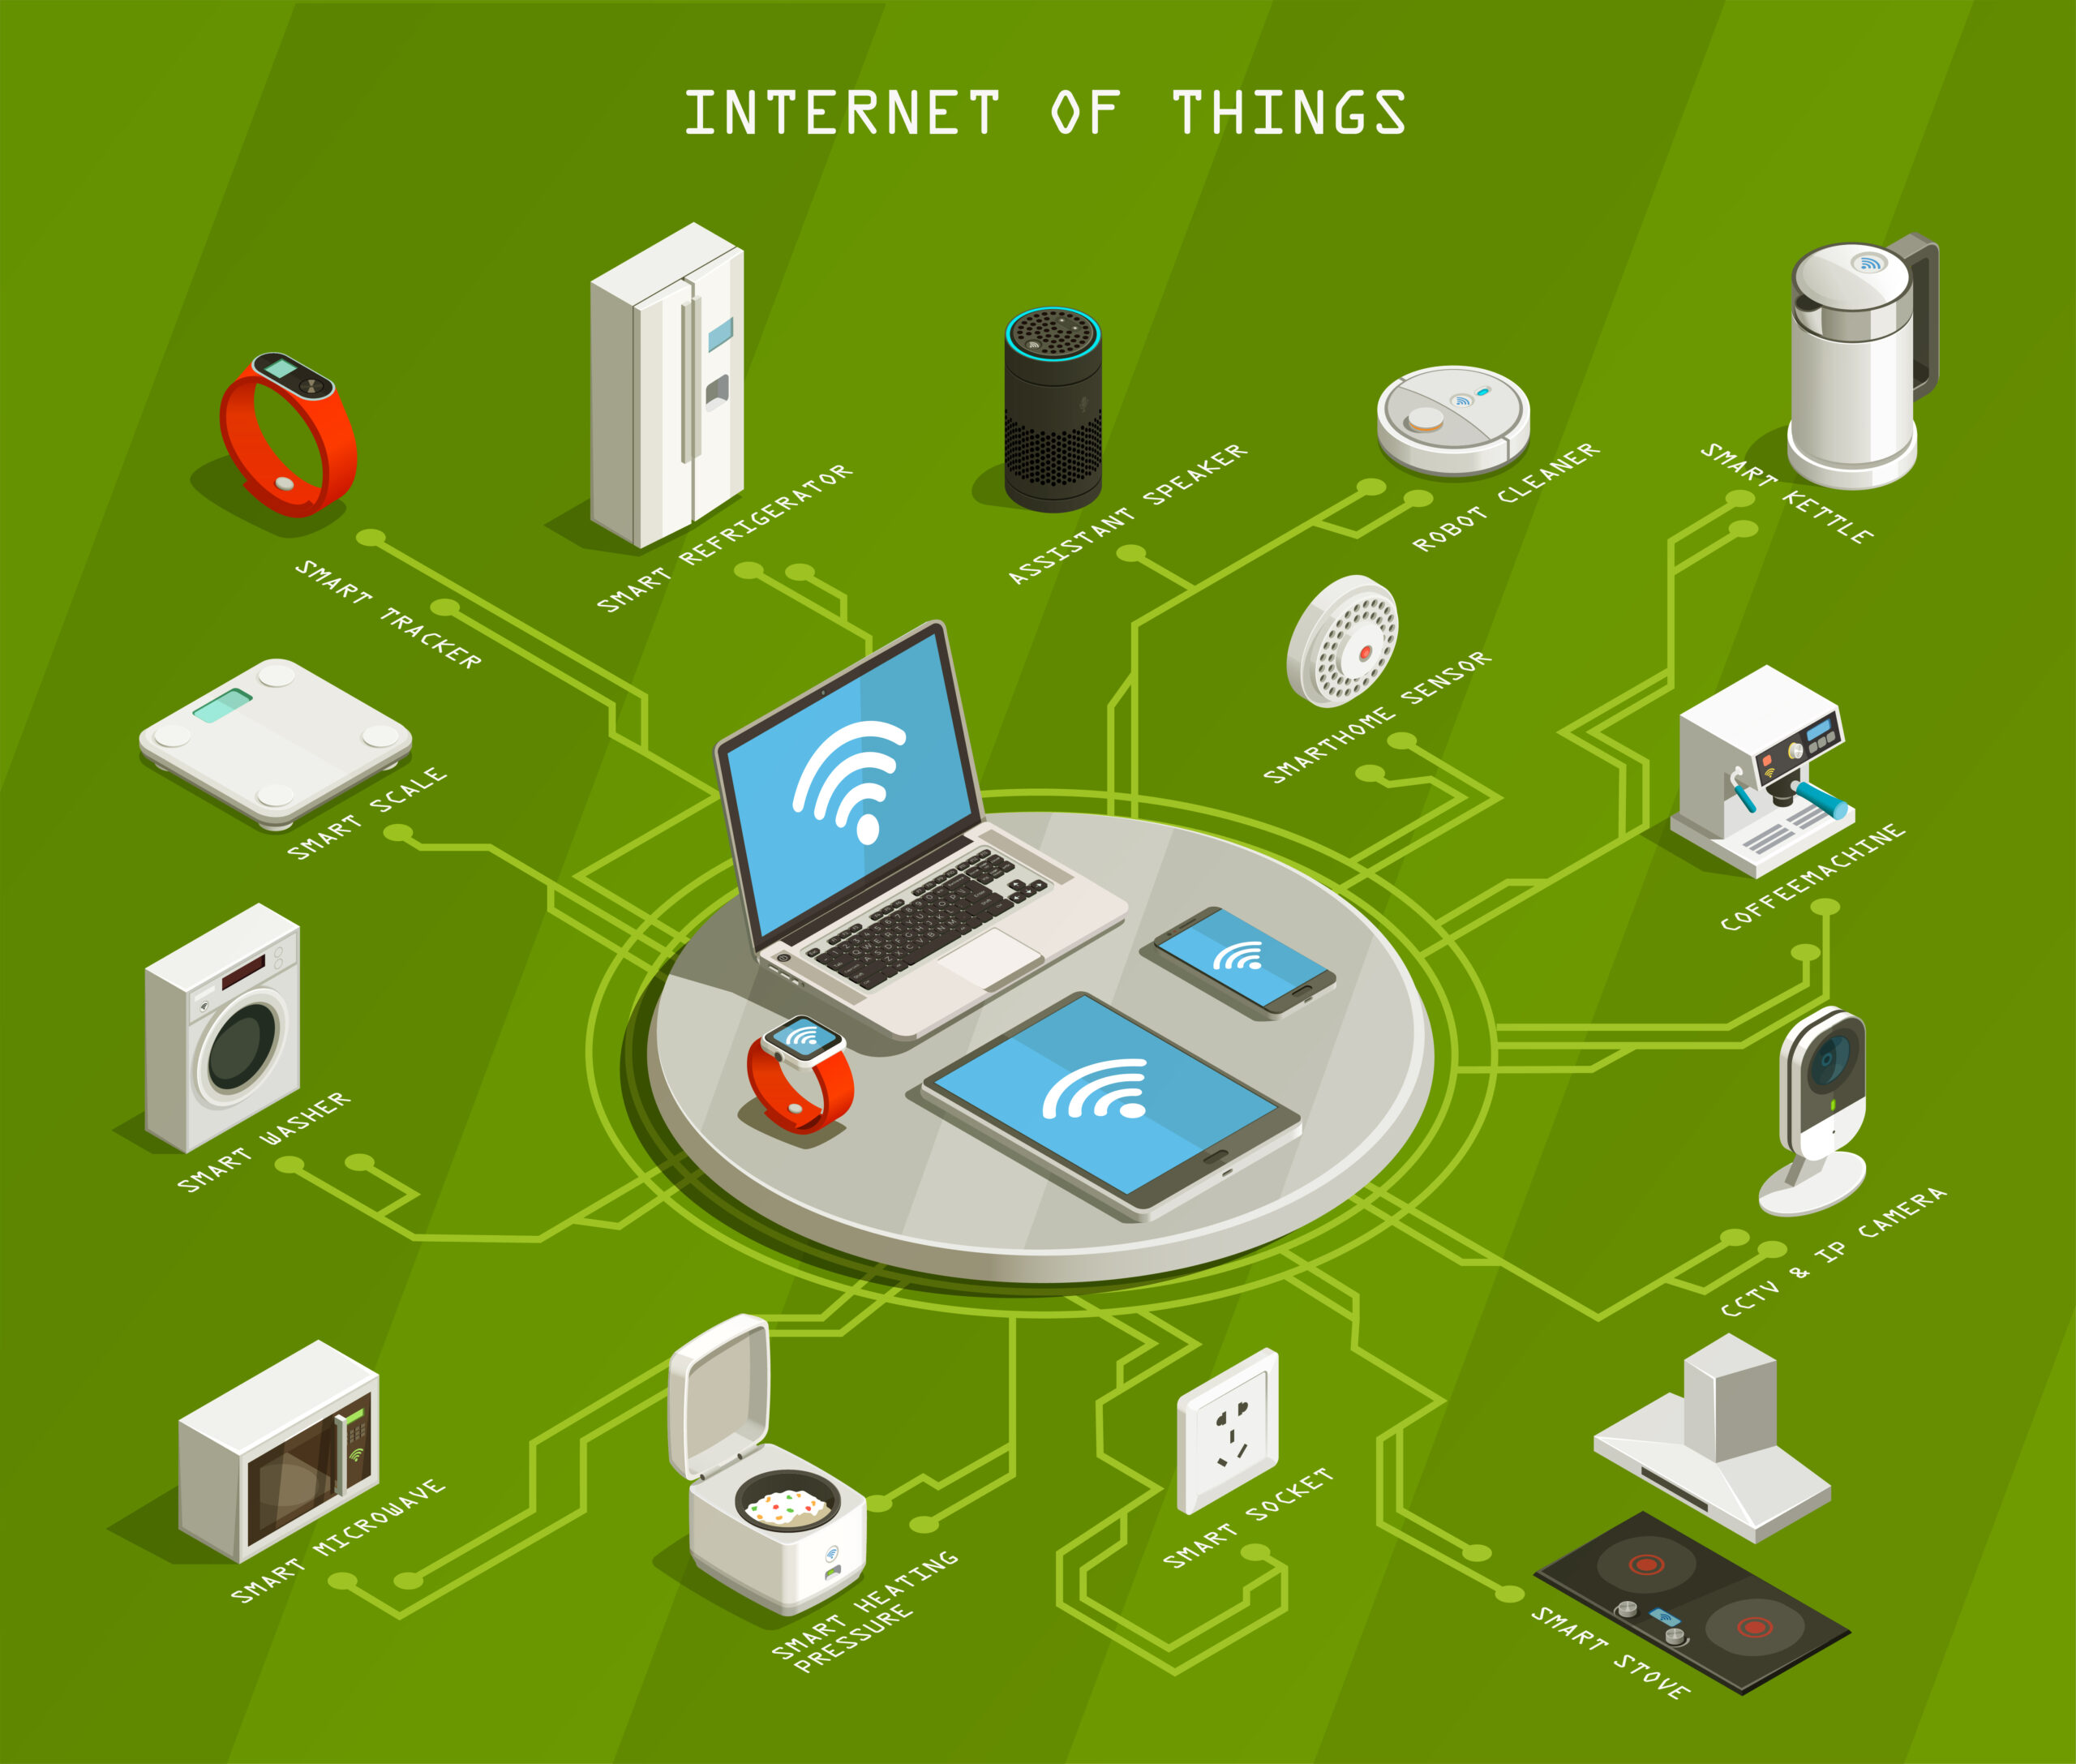 Internet of Things (IoT) Google Home Amazon Alexa Apple Siri Connected Devices Smart Living IoT Security Digital Connectivity Future Technology IoT Innovations